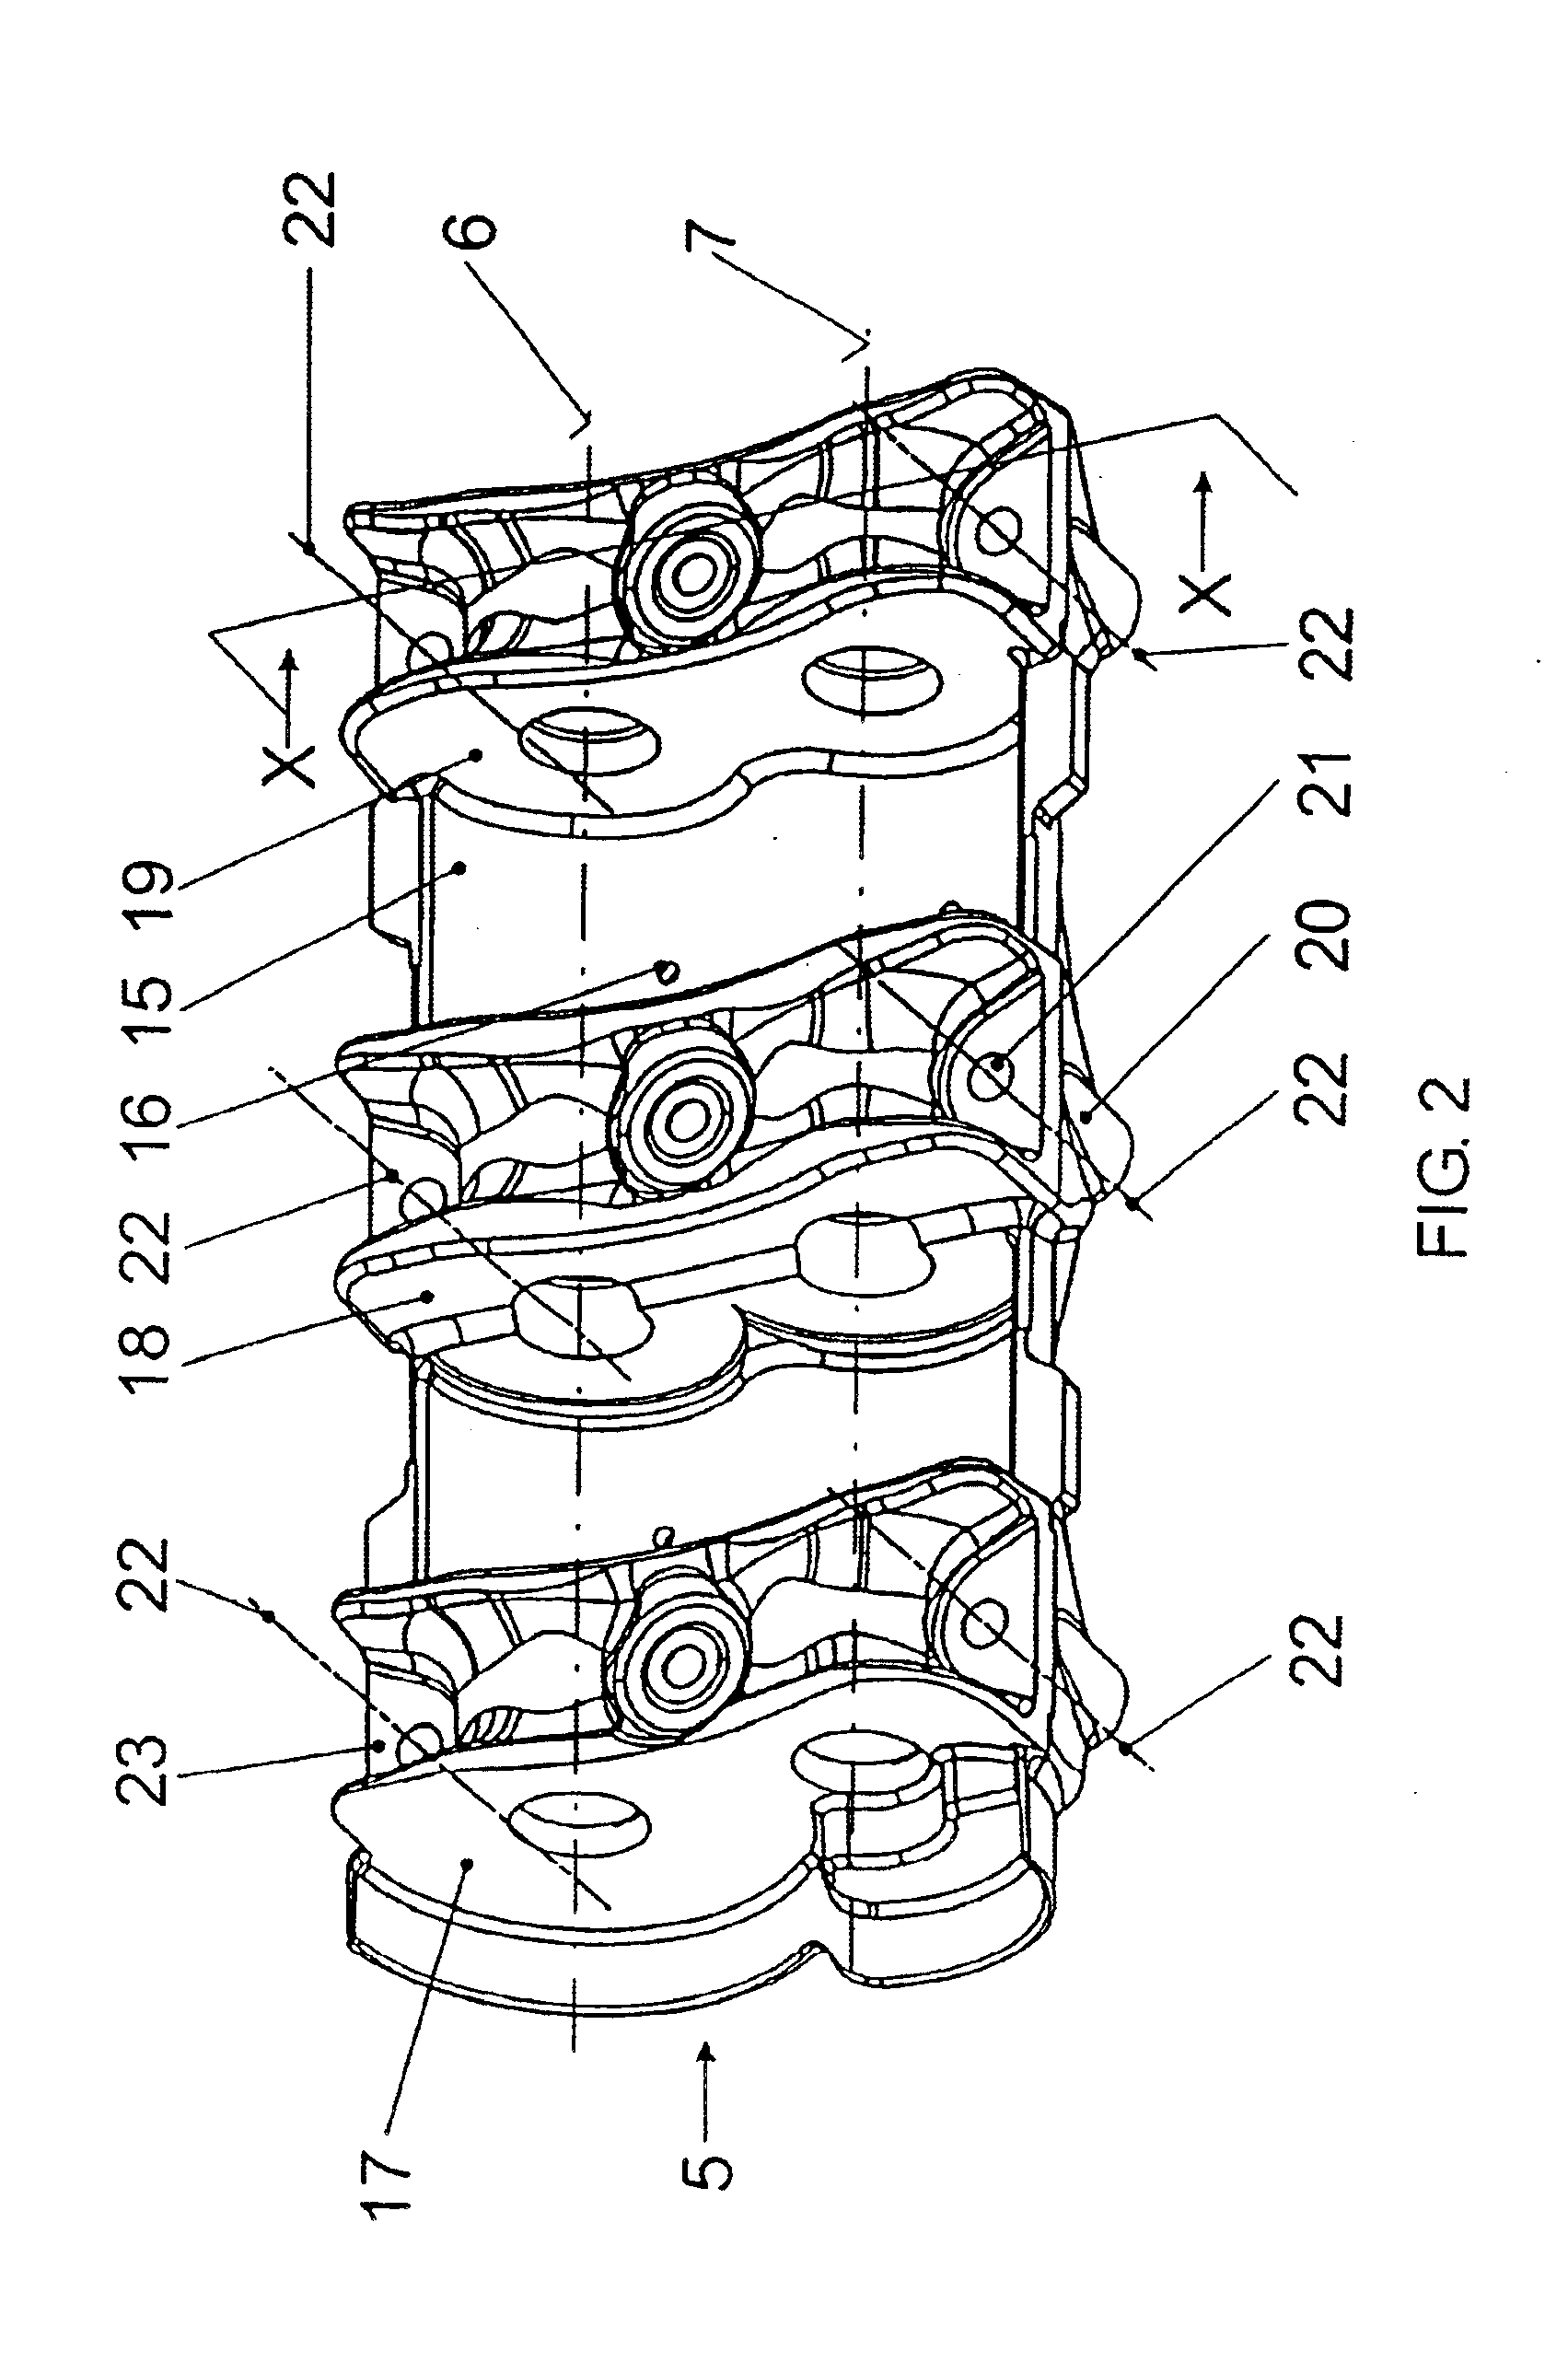 Compensating shaft assembly for piston engines